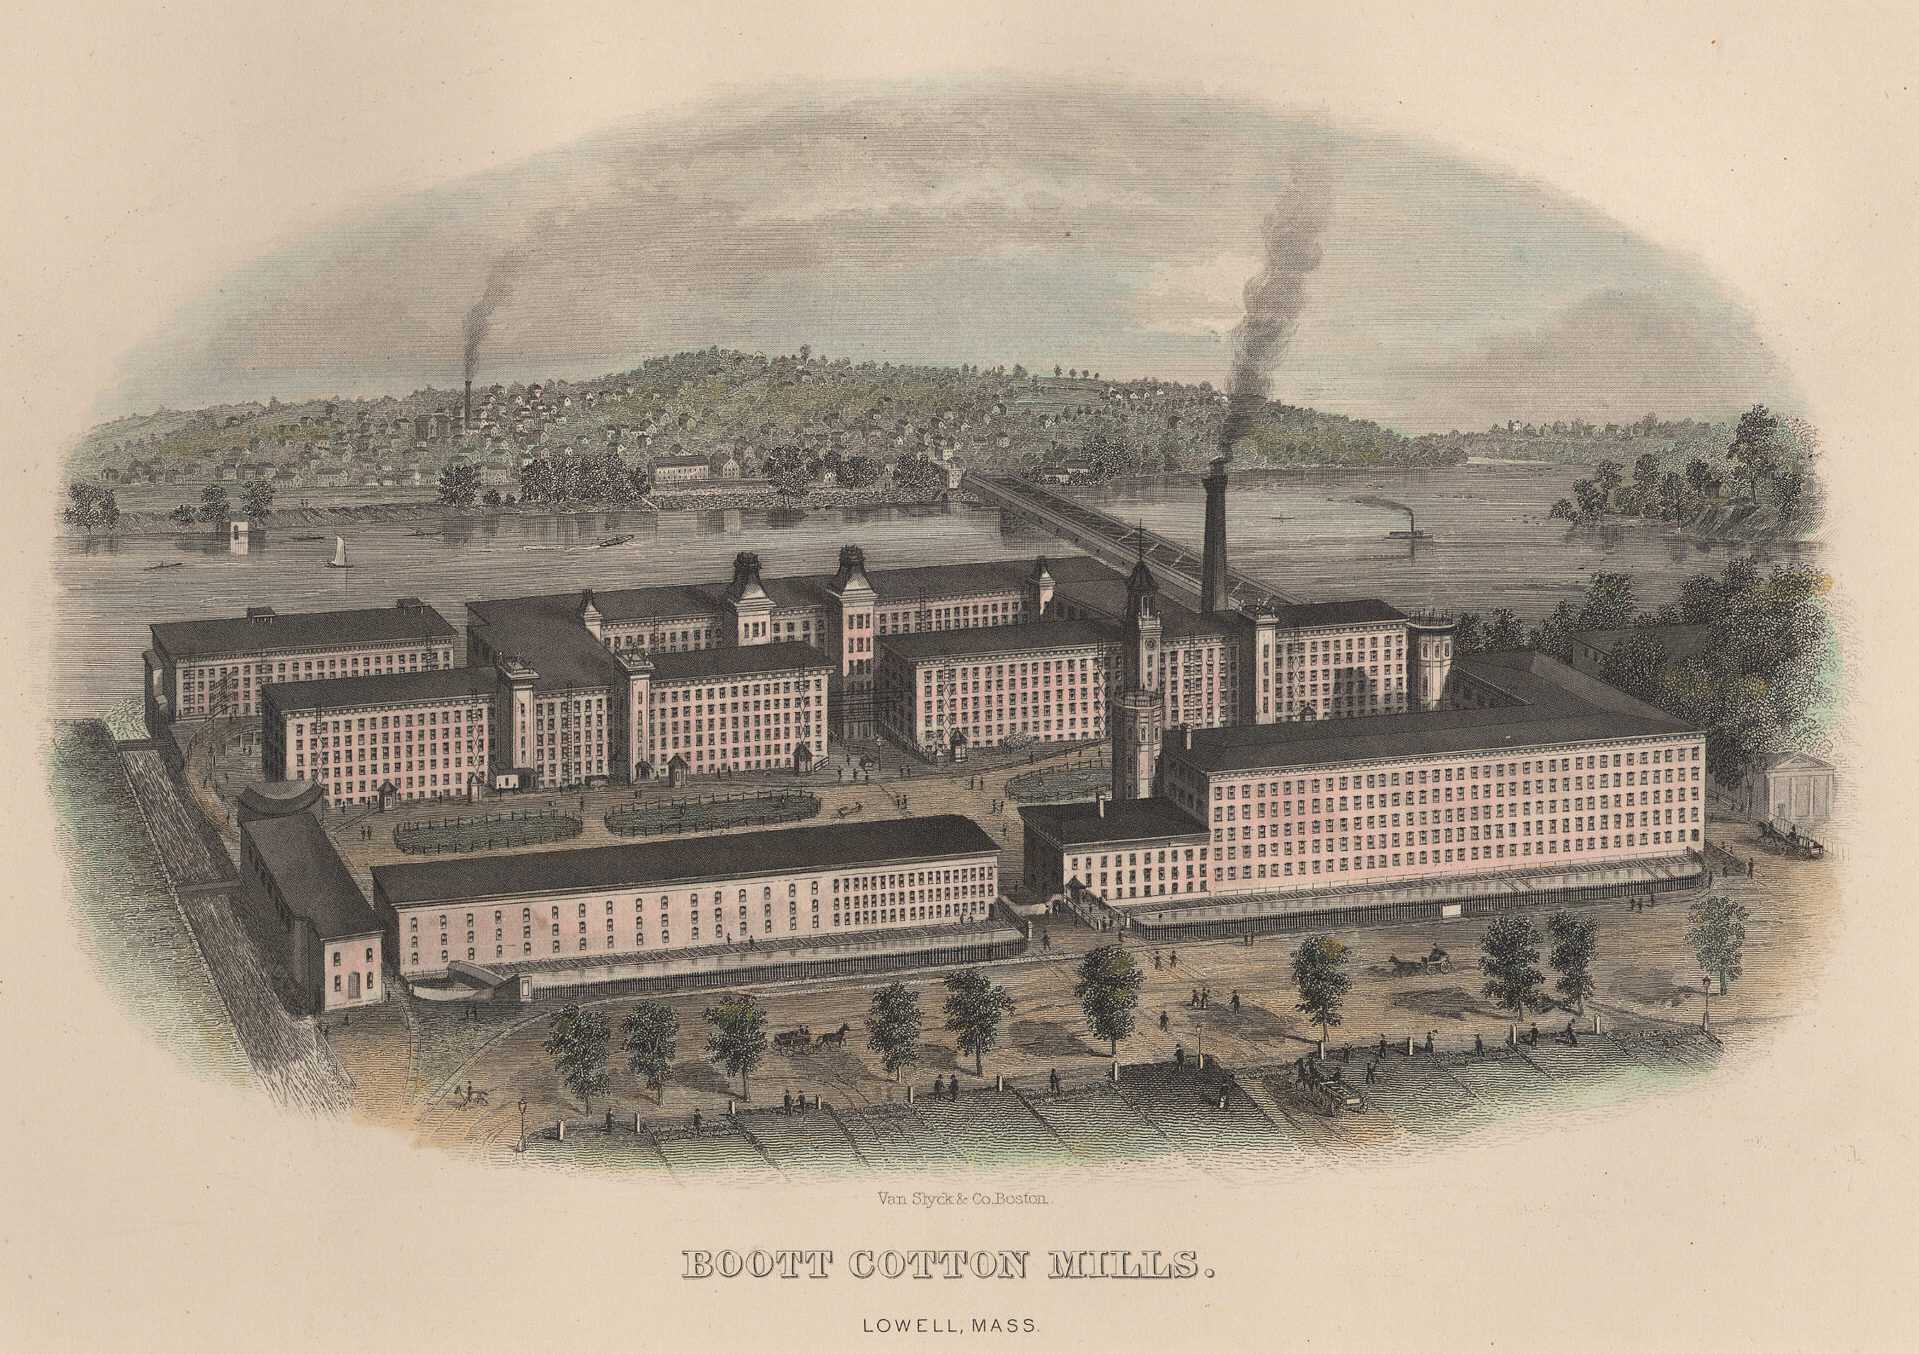 Illustration of a cotton mill in Lowell, Massachusetts